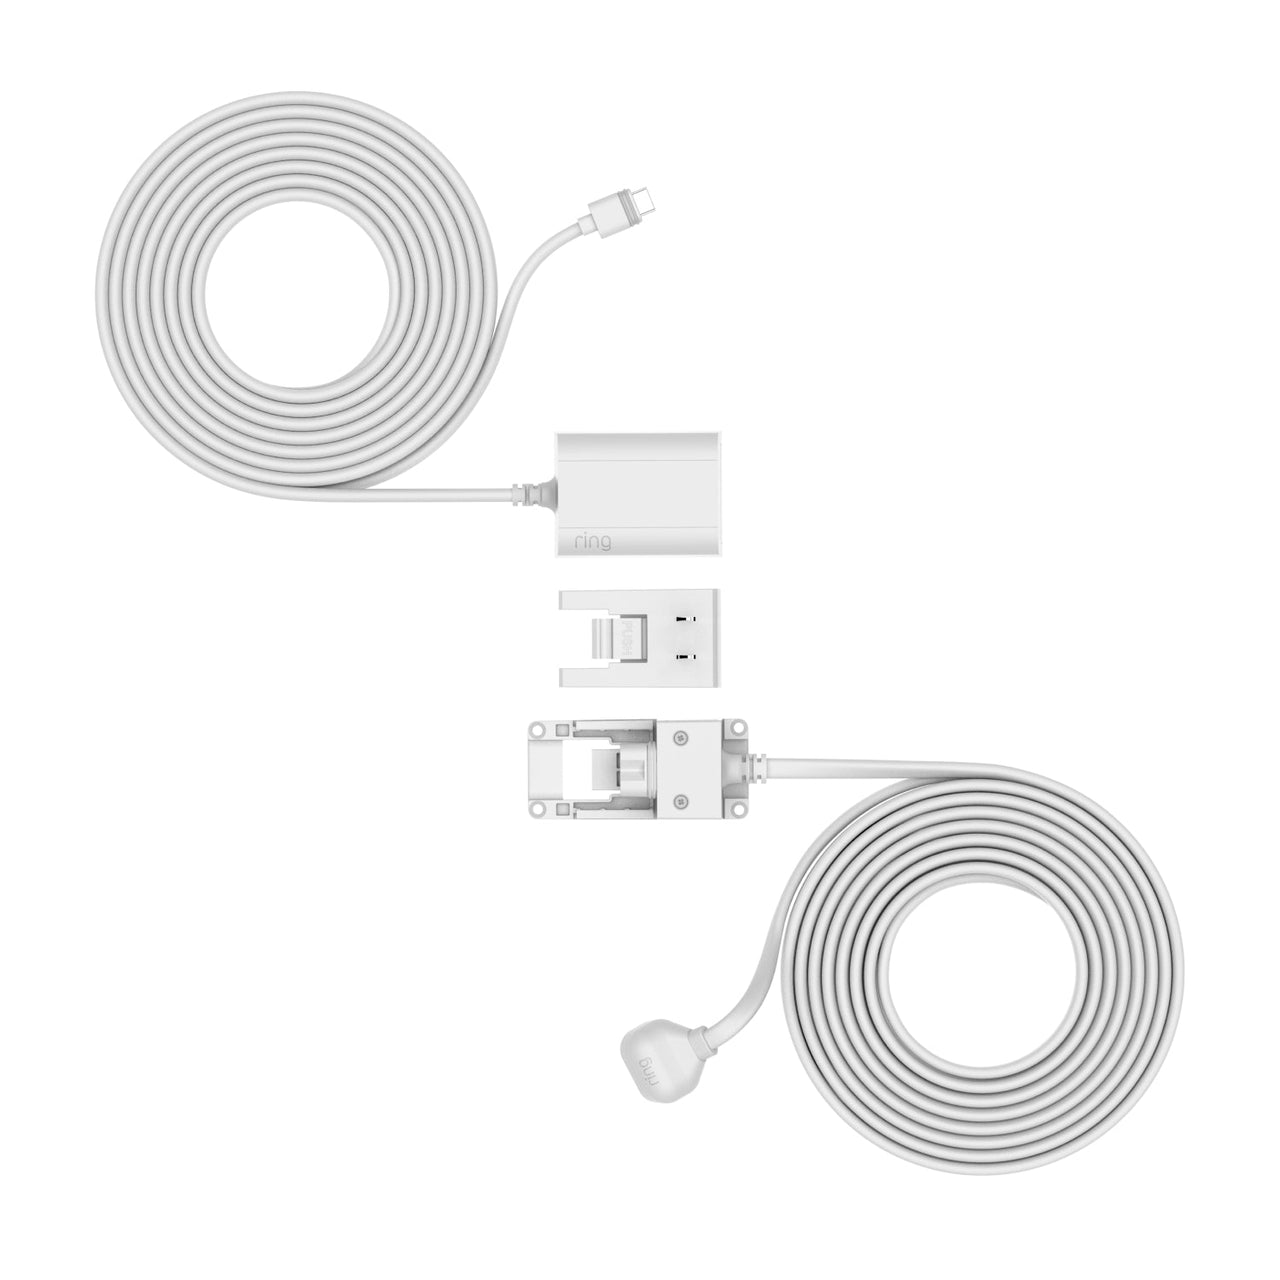 products/ring_indoor_outdoor_power_adapter_usb-c_separate_wht_1500x1500_1.jpg